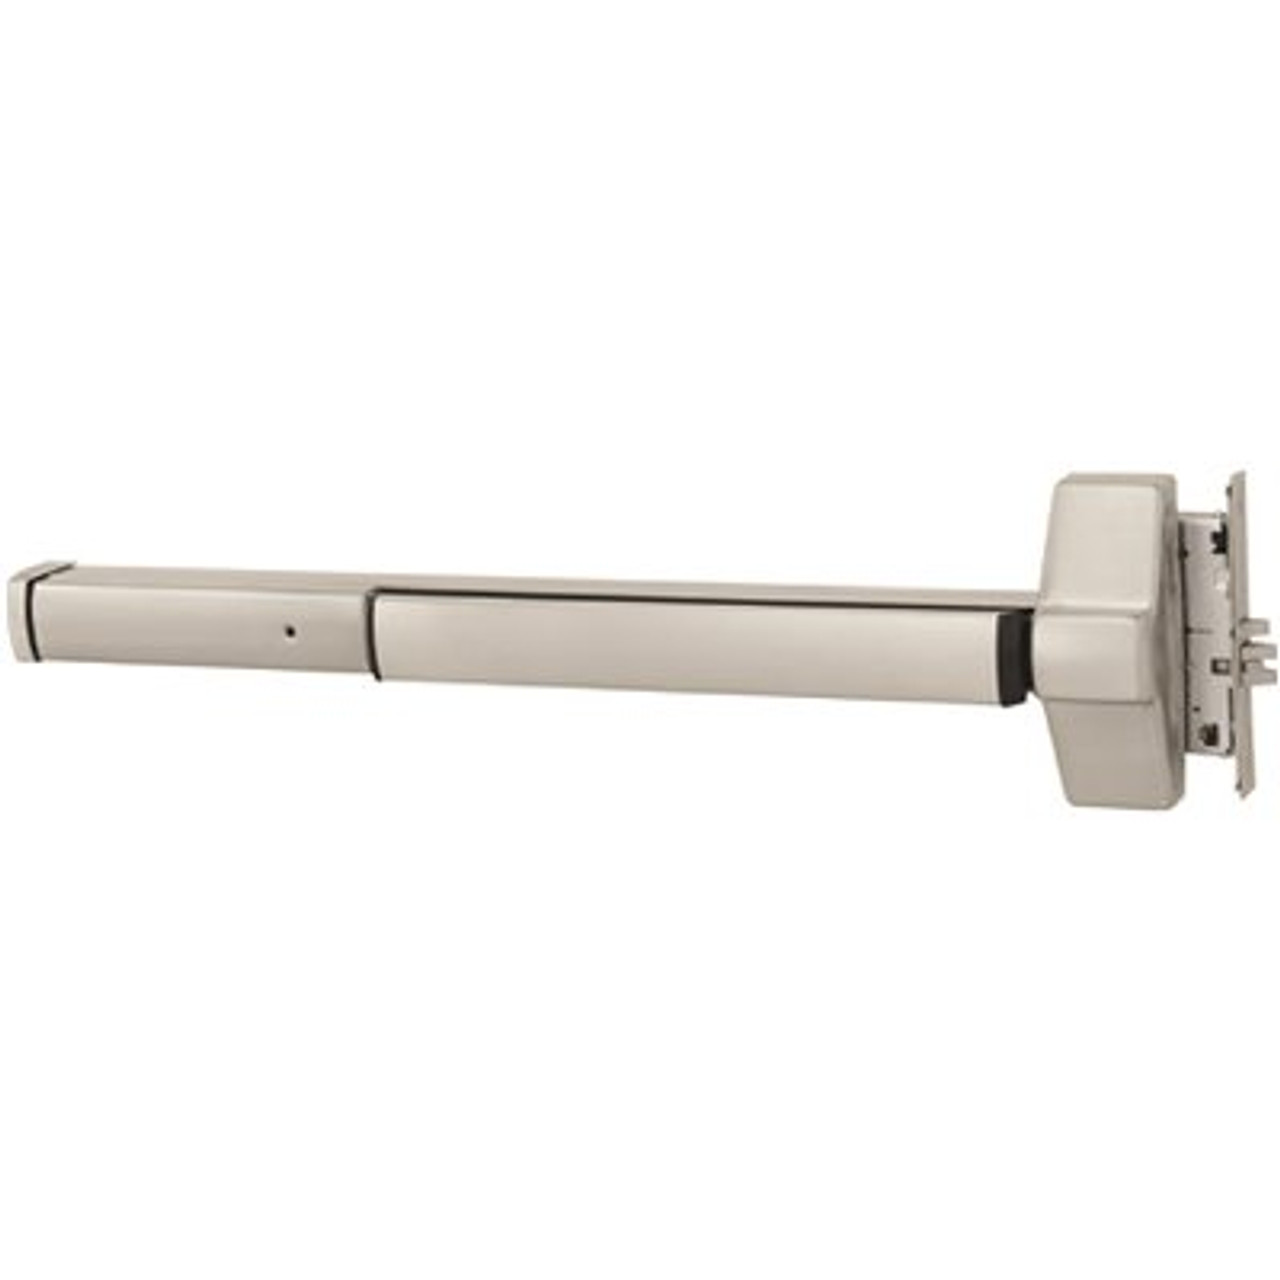 Corbin Russwin Ed5000 Series Grade 1,36 In., Stainless Steel Finish Lhr Passage/Classroom Mortise Exit Device